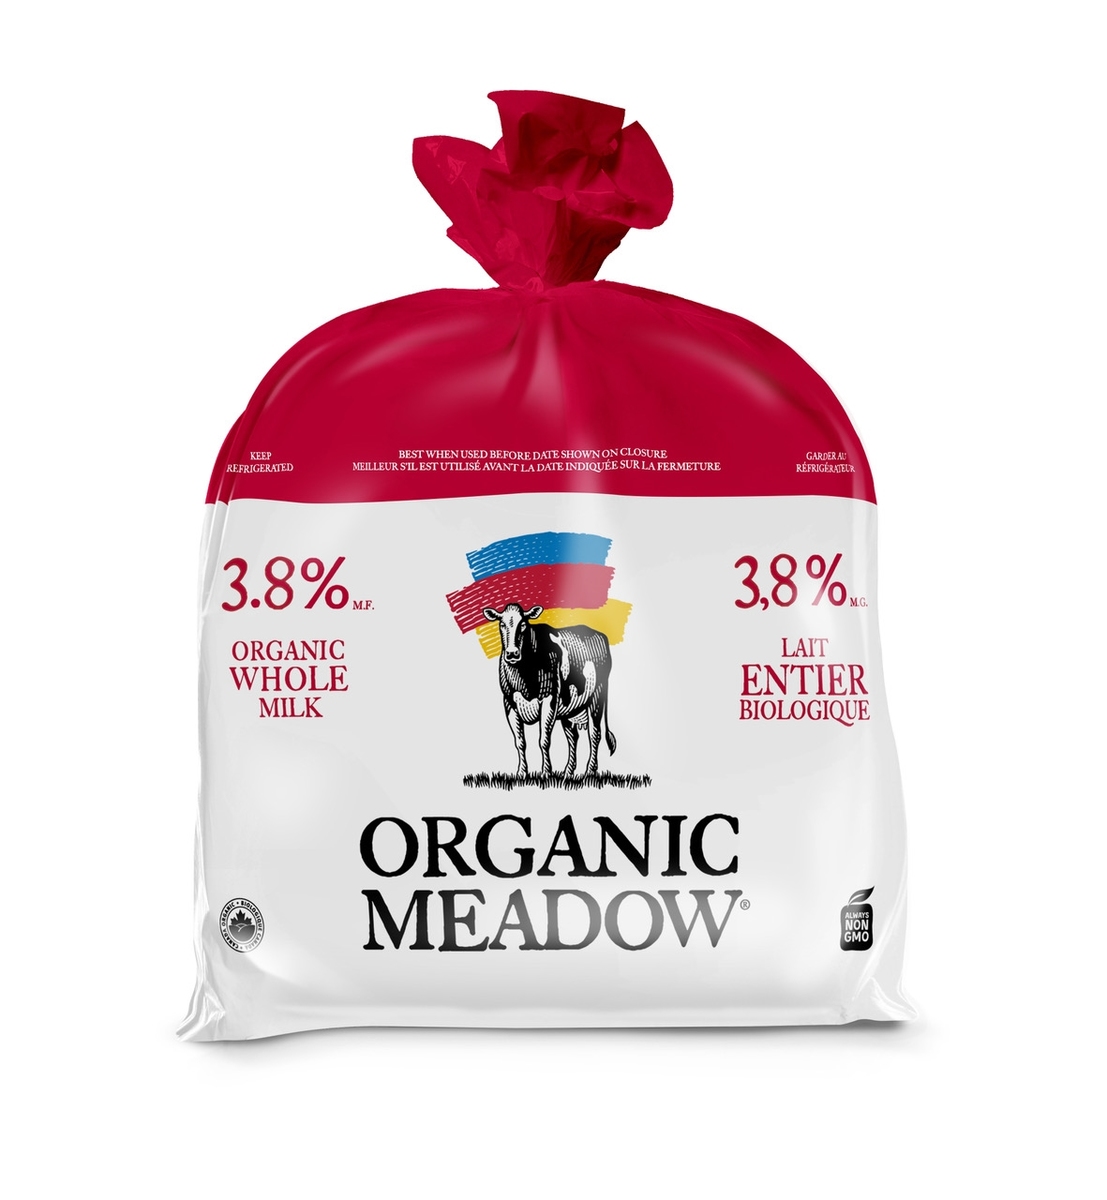 Rolling Meadow Dairy Grass Fed 3.8% Whole Milk, 4 L